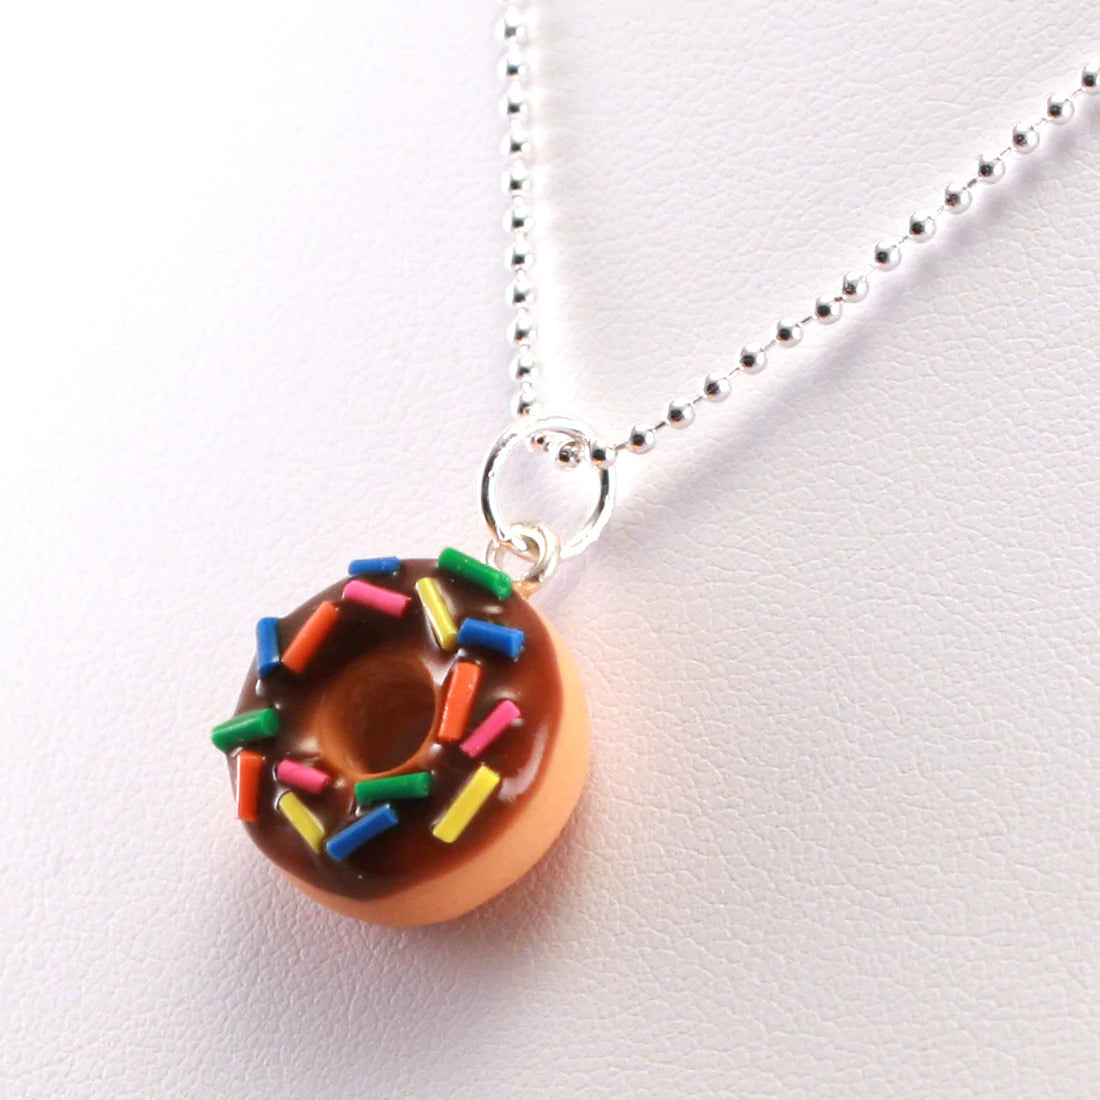 Scented Jewelry ~ Tiny Hands Scented Chocolate Sprinkles Donut Necklace!